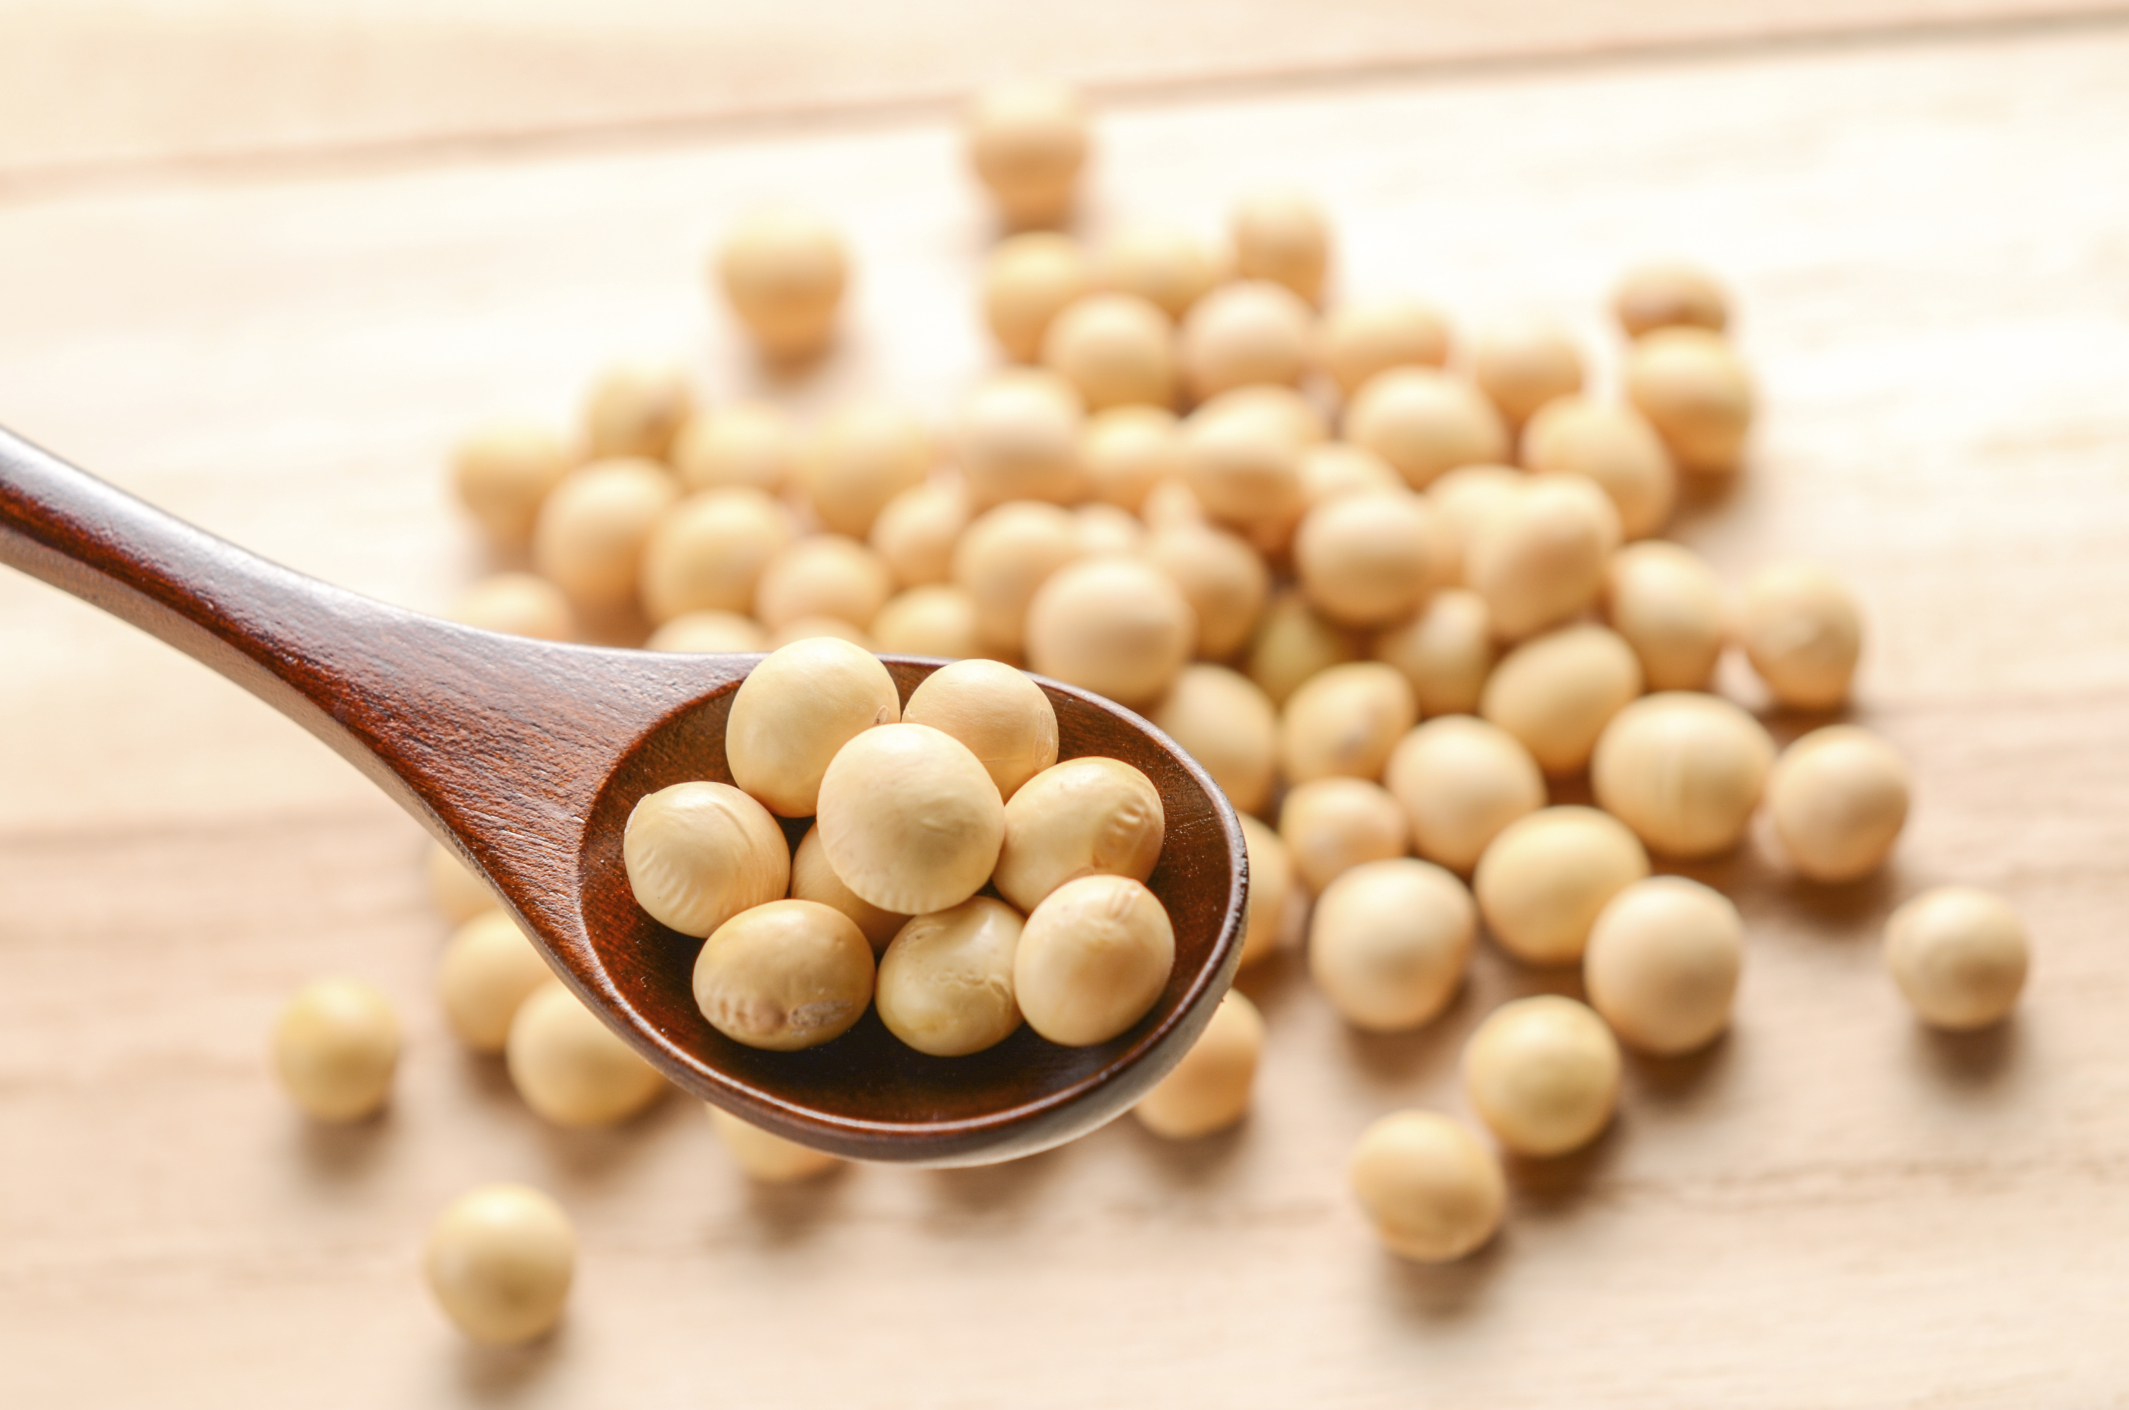 Soy protein helps lower bad cholesterol a small but important amount -  Harvard Health